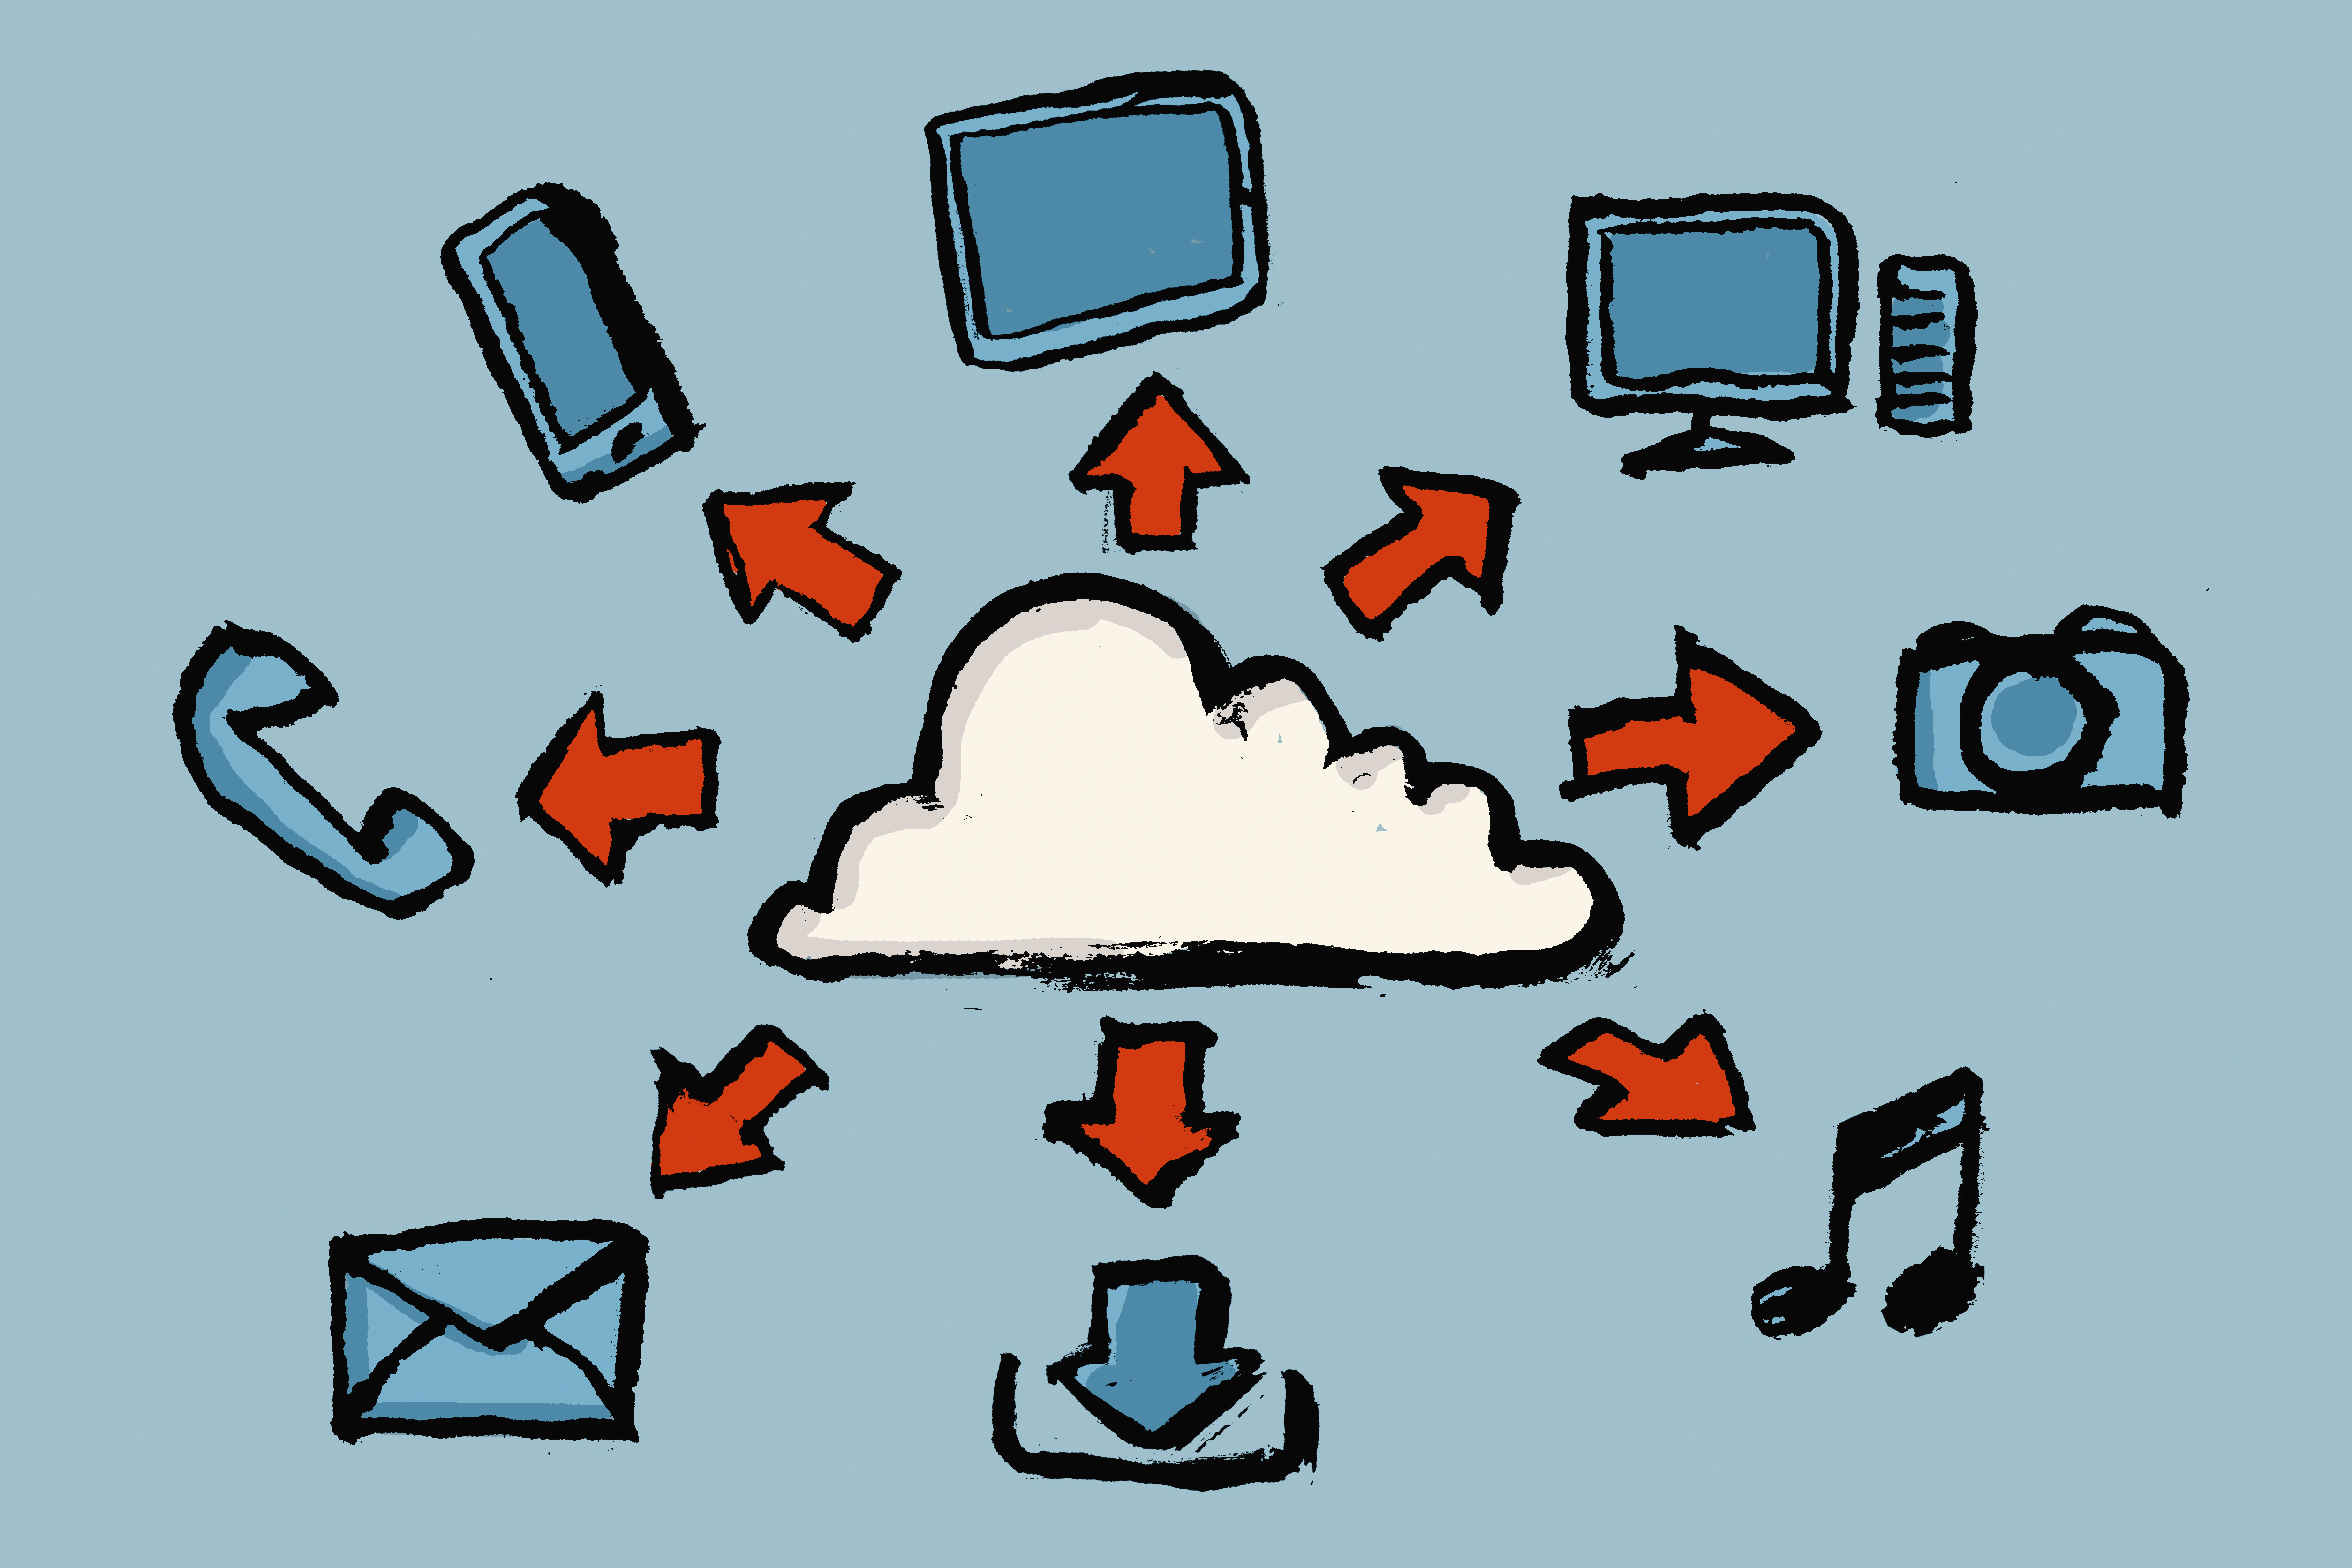 An illustration of a cloud with arrows to various forms of technology.